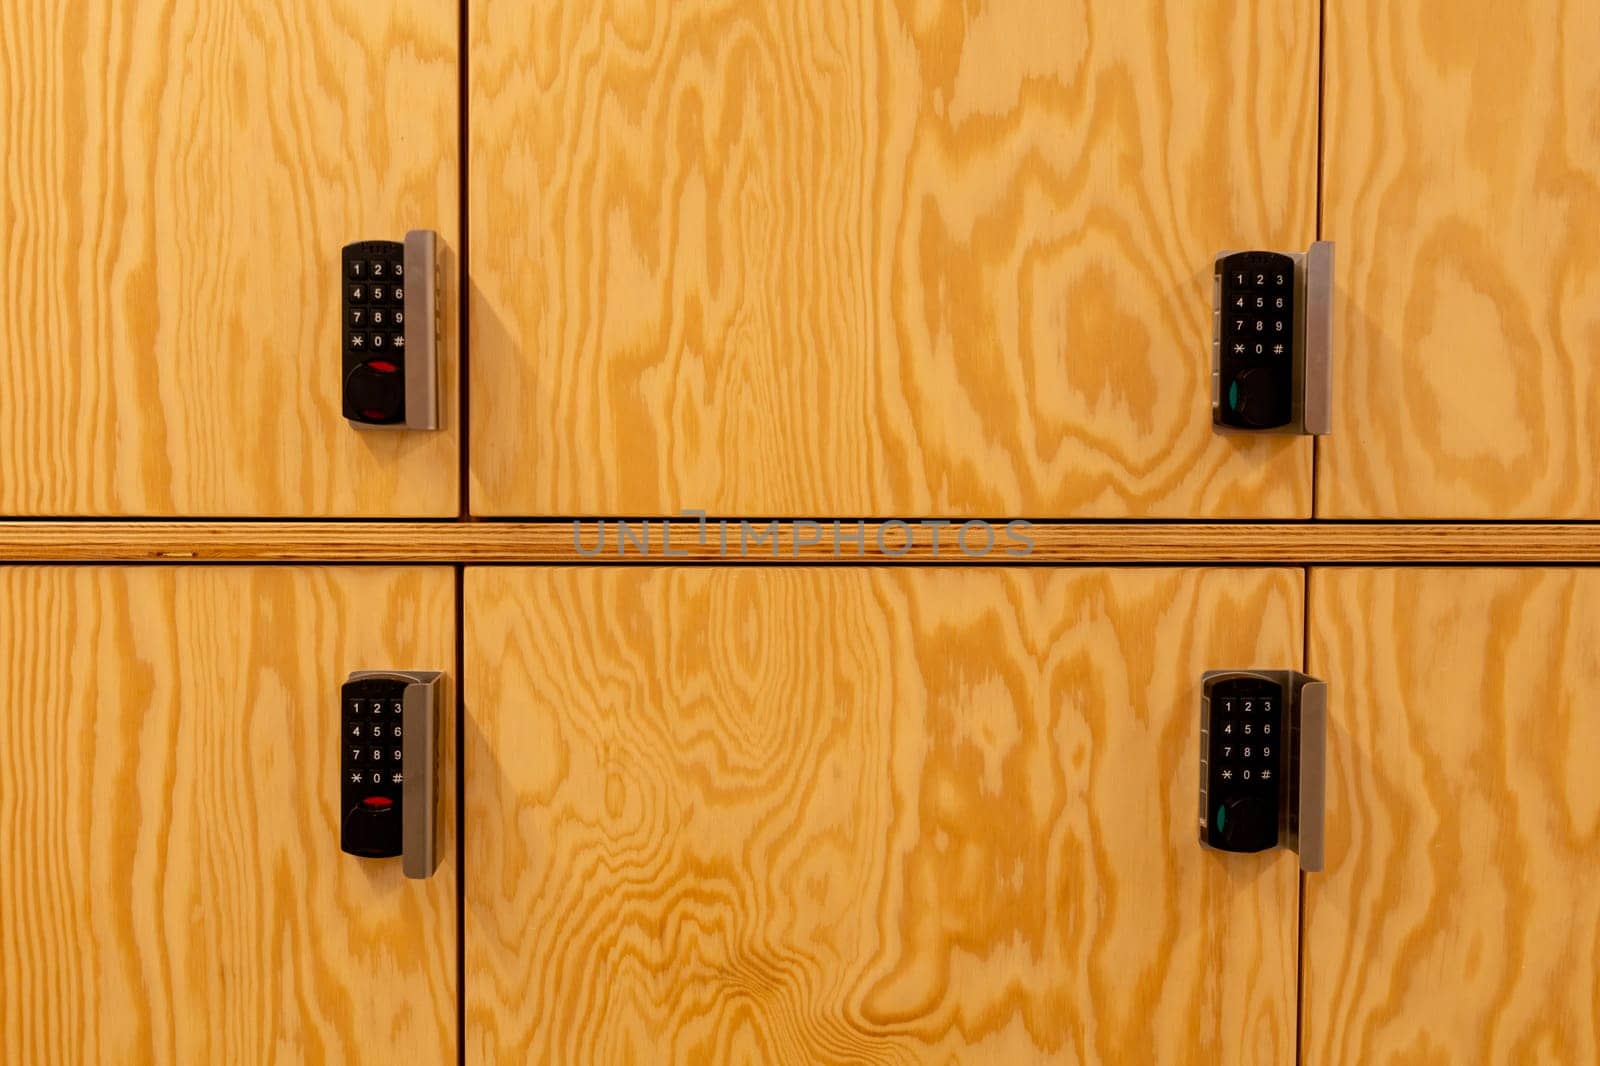 set of wooden lockers for personal items. High quality photo